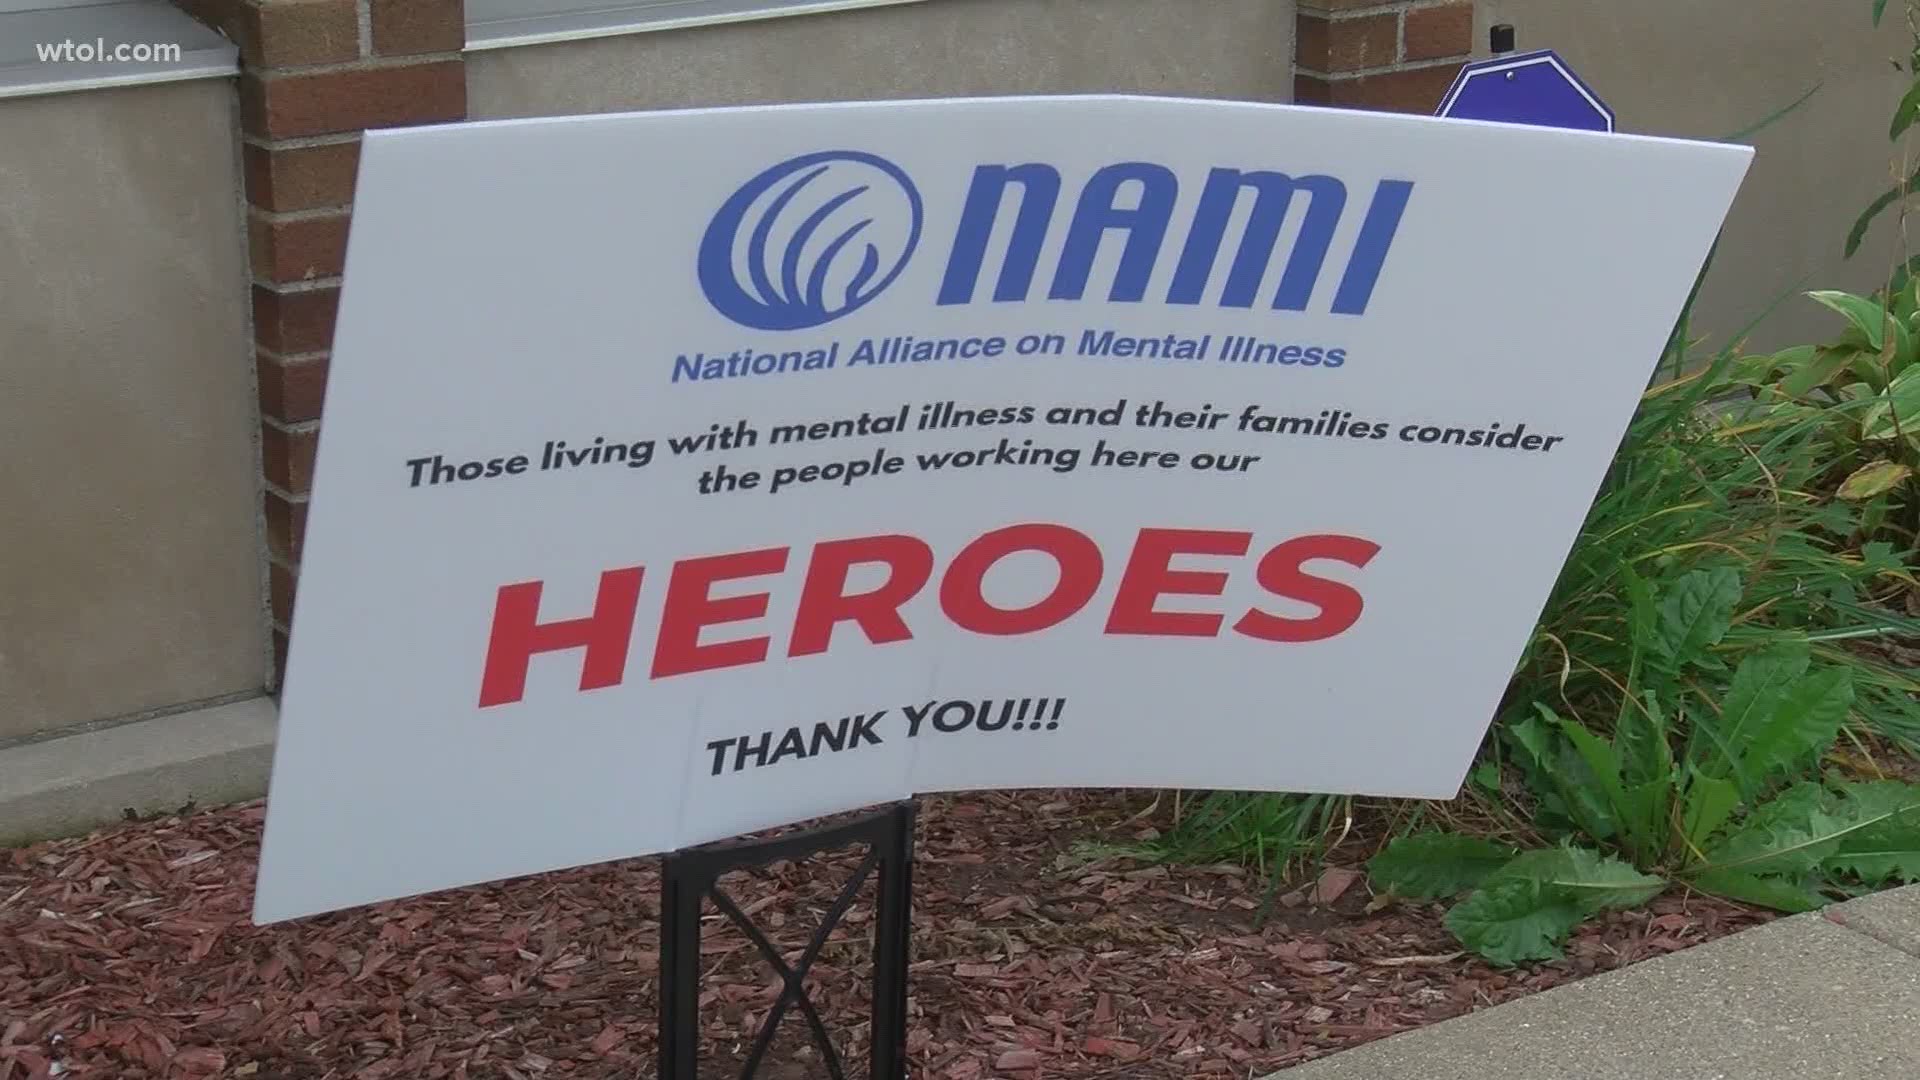 "Mental health is just as important as your physical health," NAMI of Greater Toledo director Robin Isenberg said.